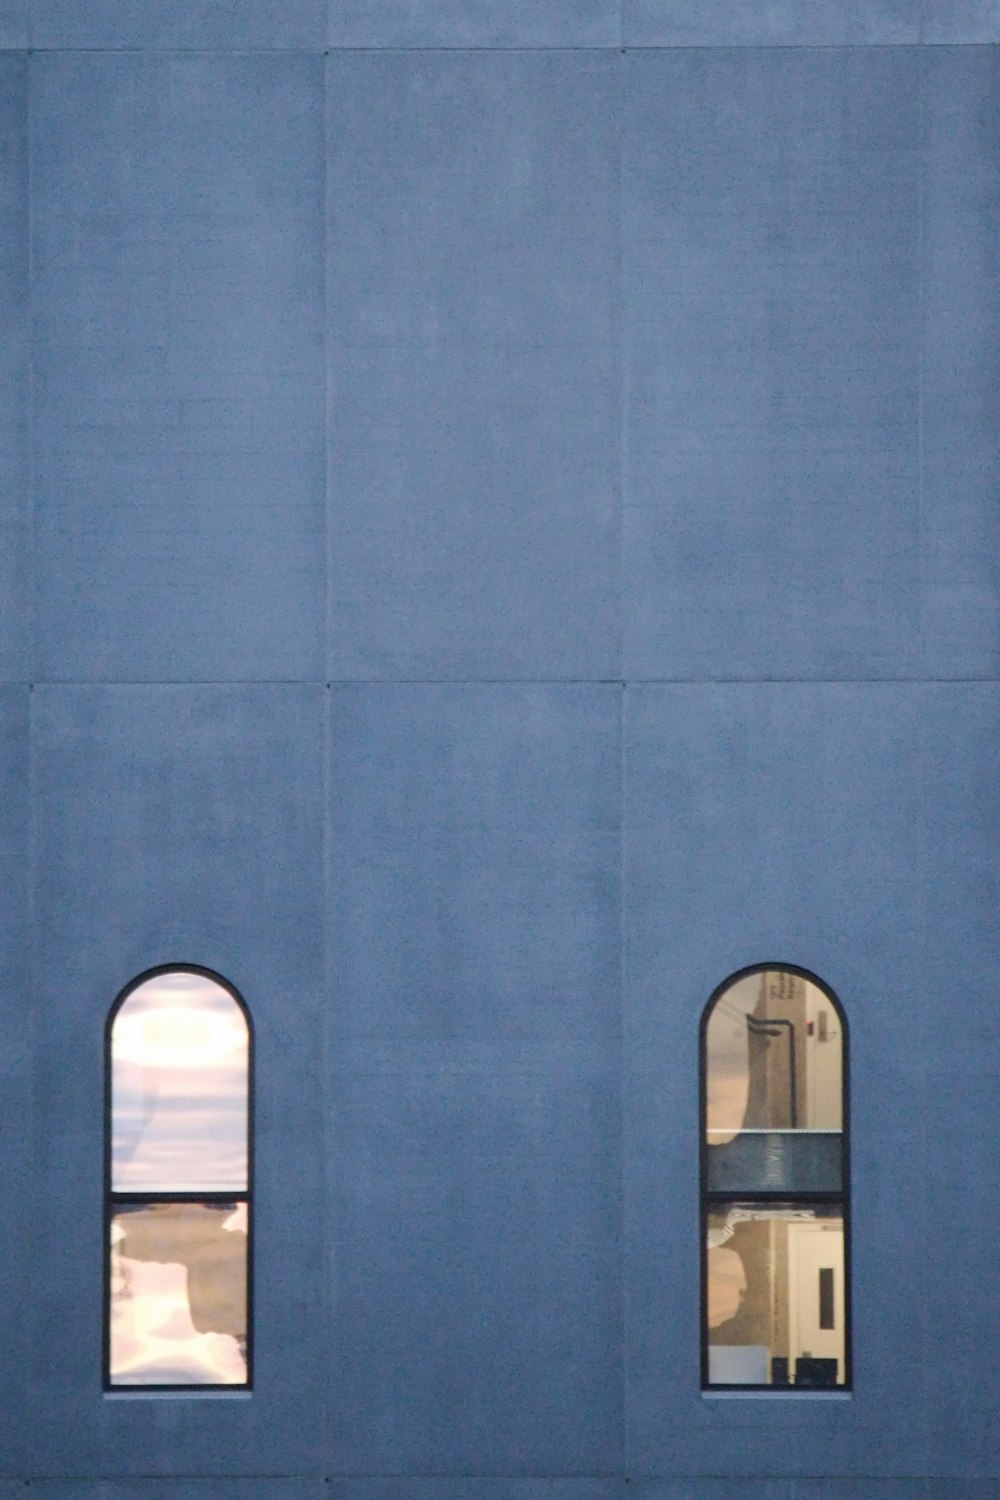 a blue building with three windows and a clock